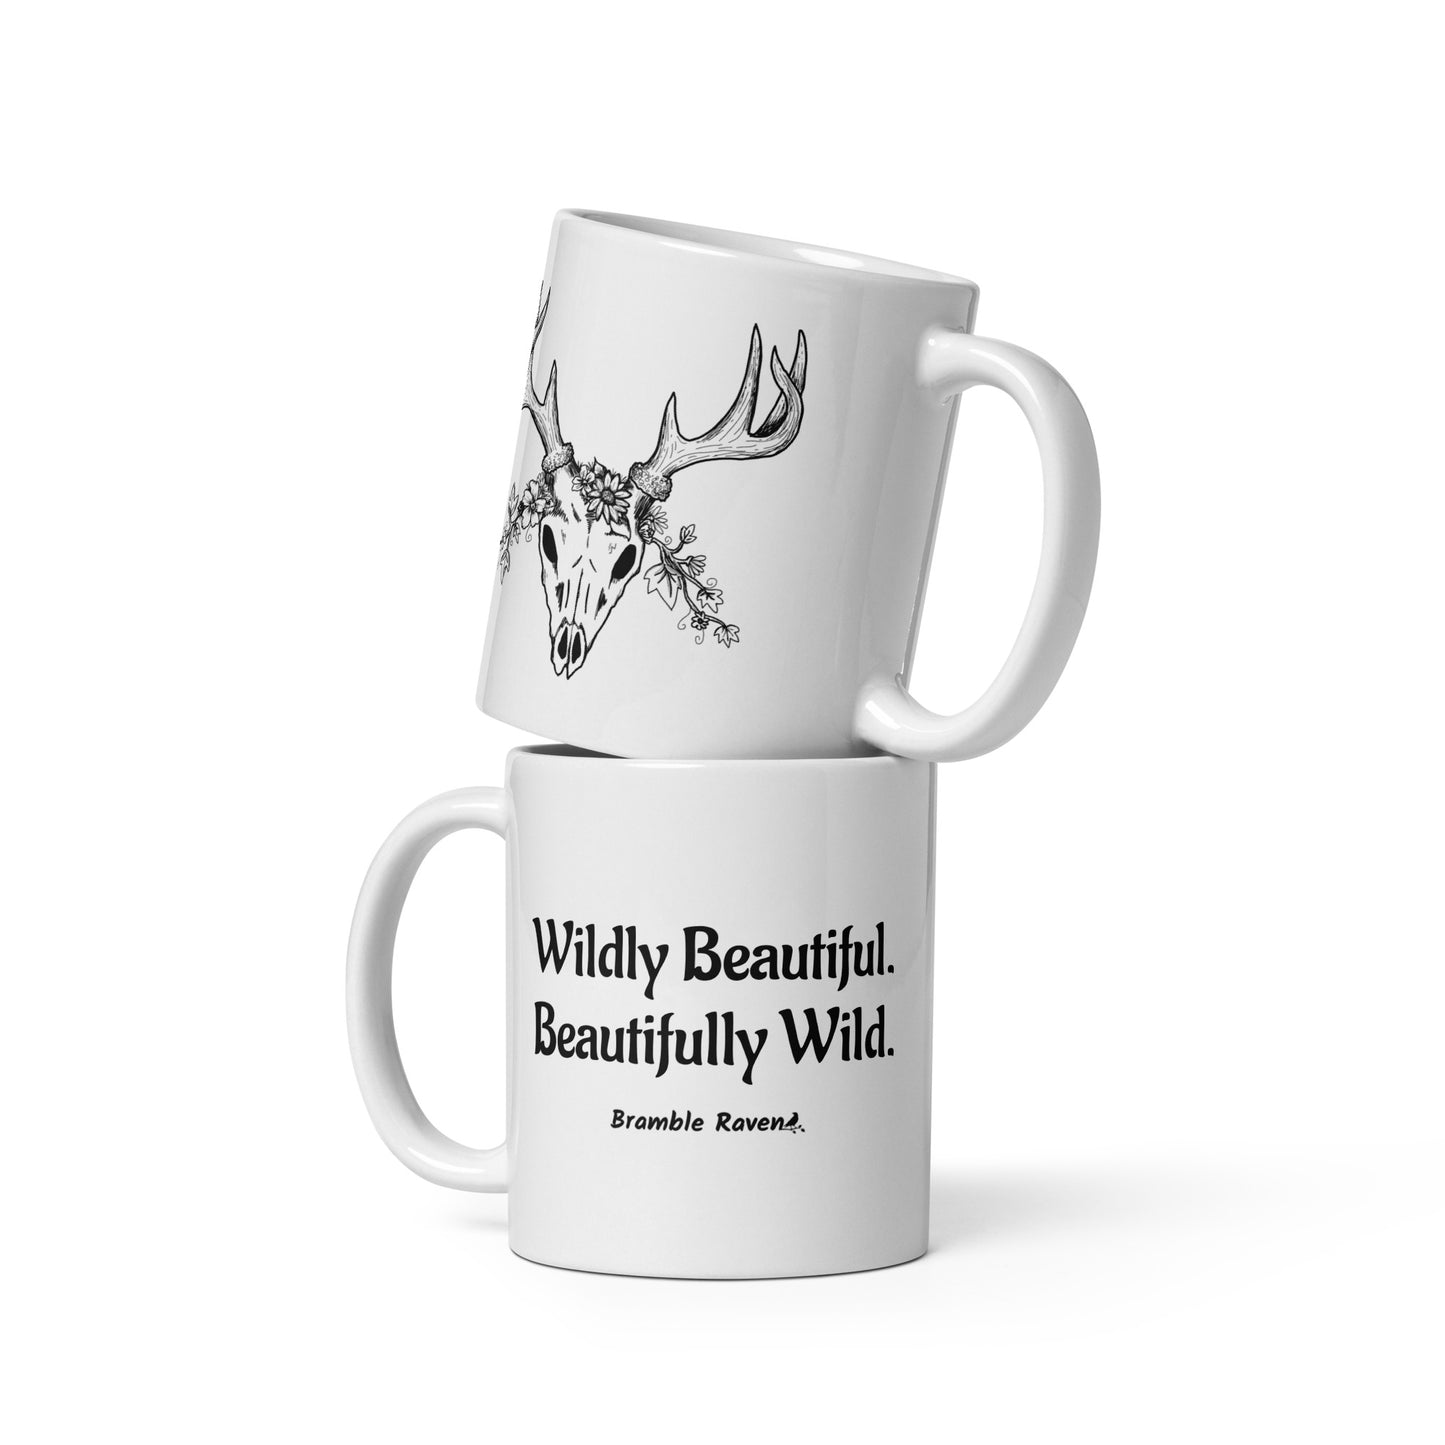 11 ounce white ceramic mug. Features hand-illustrated deer skull wreathed in flowers on one side, and text wildy beautiful, beautifully wild on the other side.